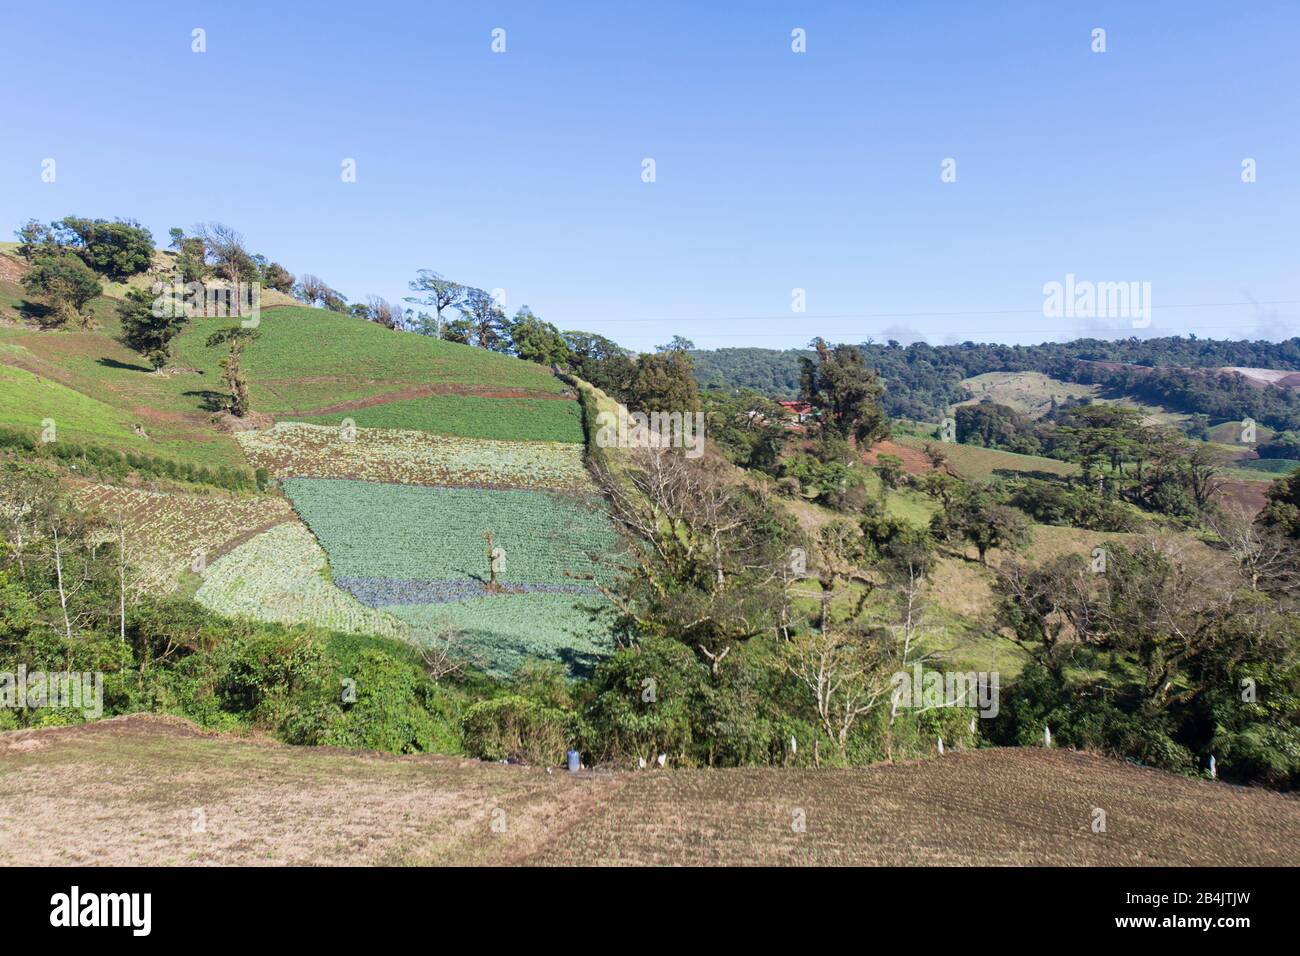 Terraced farmland in Costa Rica, growing cabbages Stock Photo